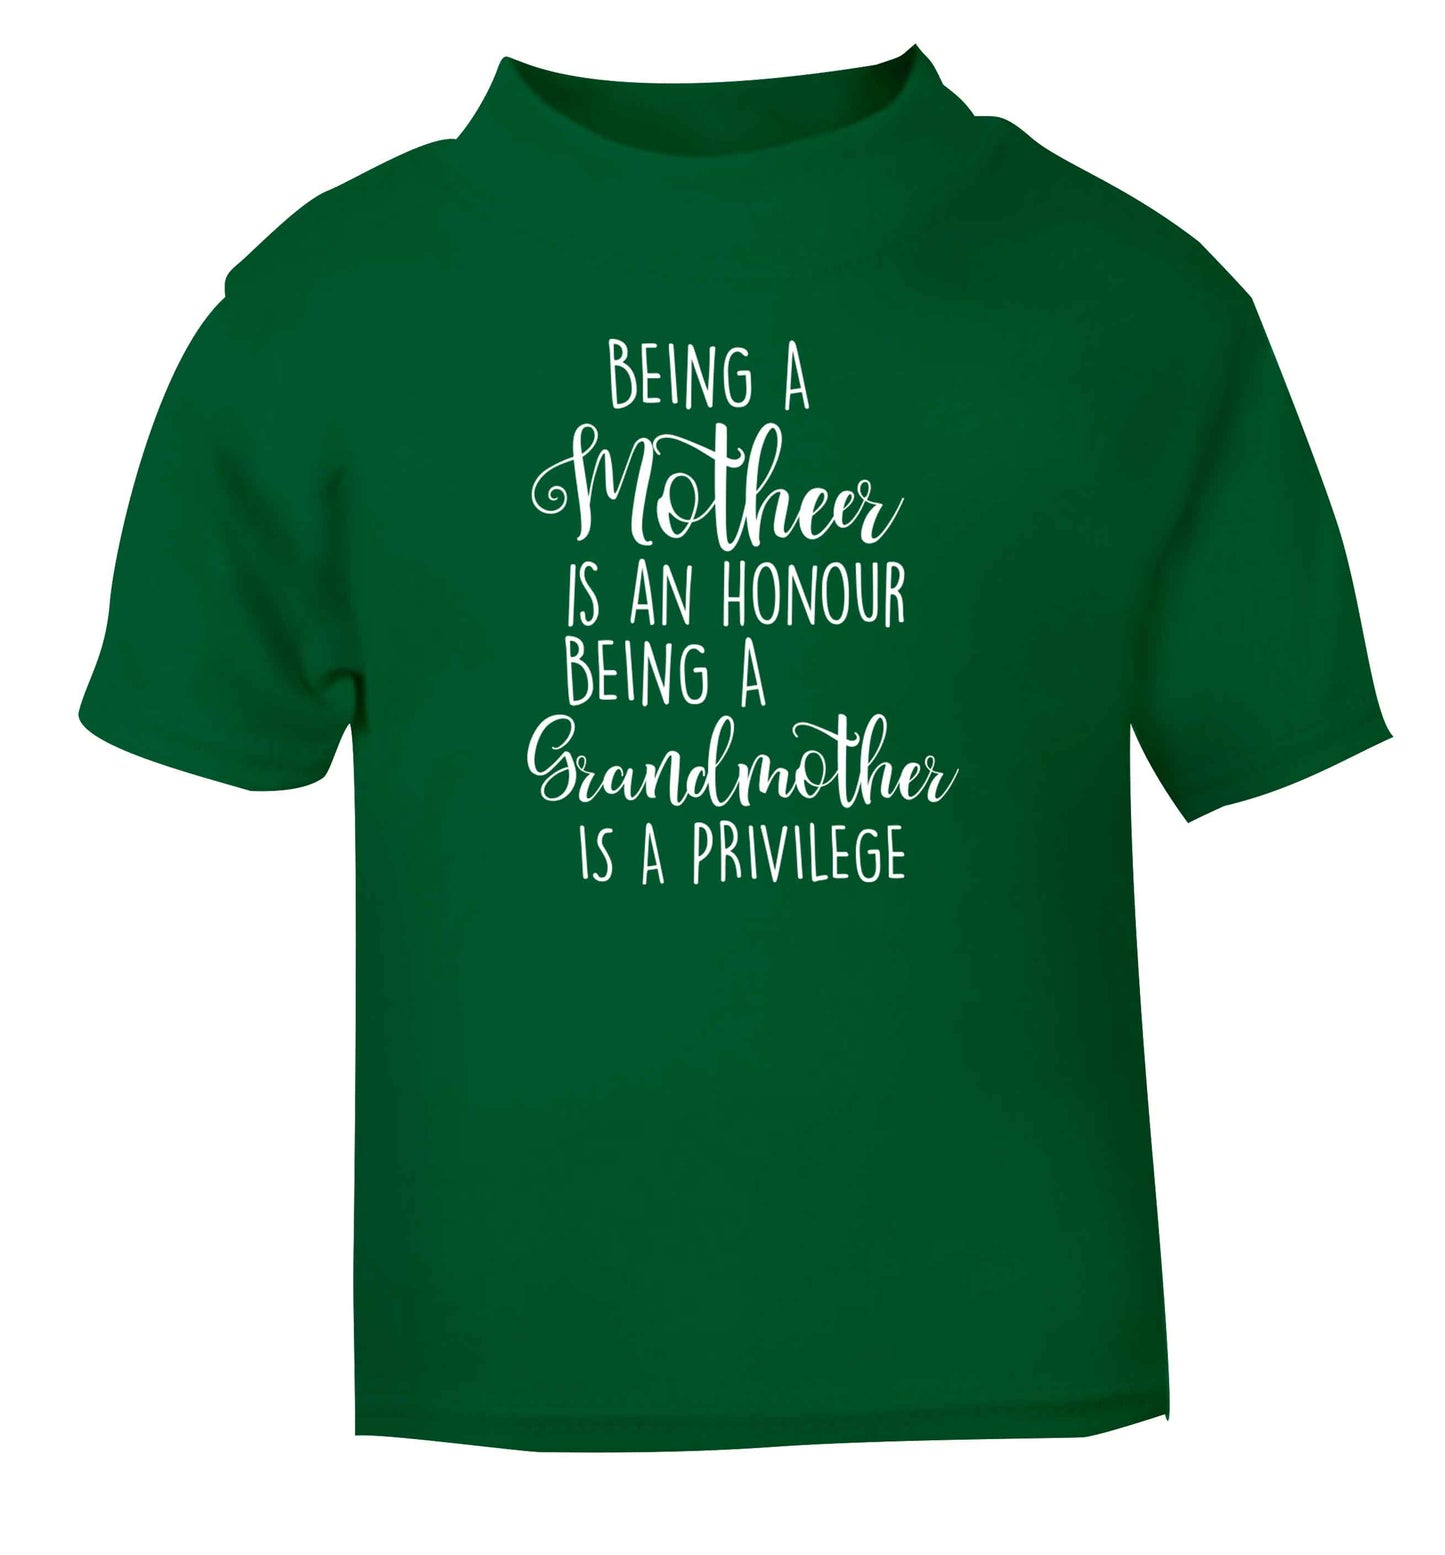 Being a mother is an honour being an grandmother is a privilege green Baby Toddler Tshirt 2 Years